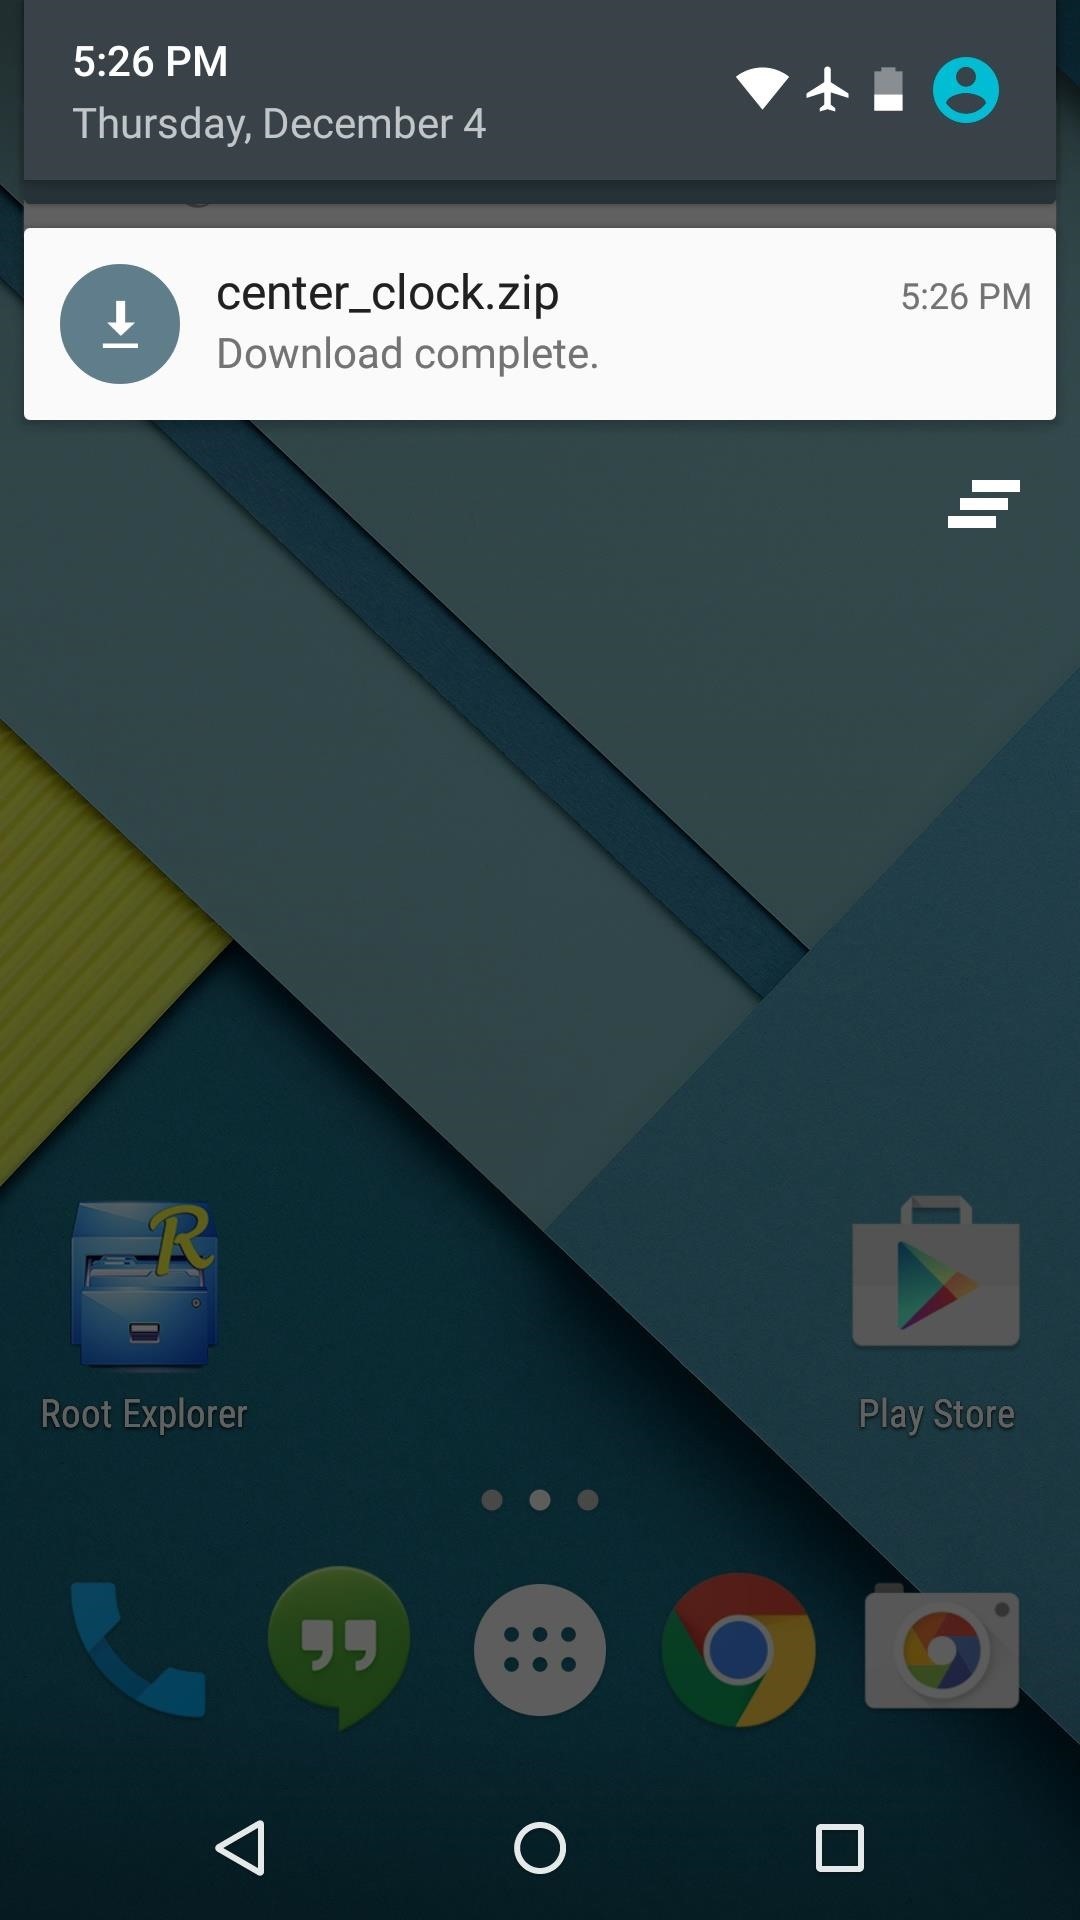 How to Center the Status Bar Clock in Android Lollipop